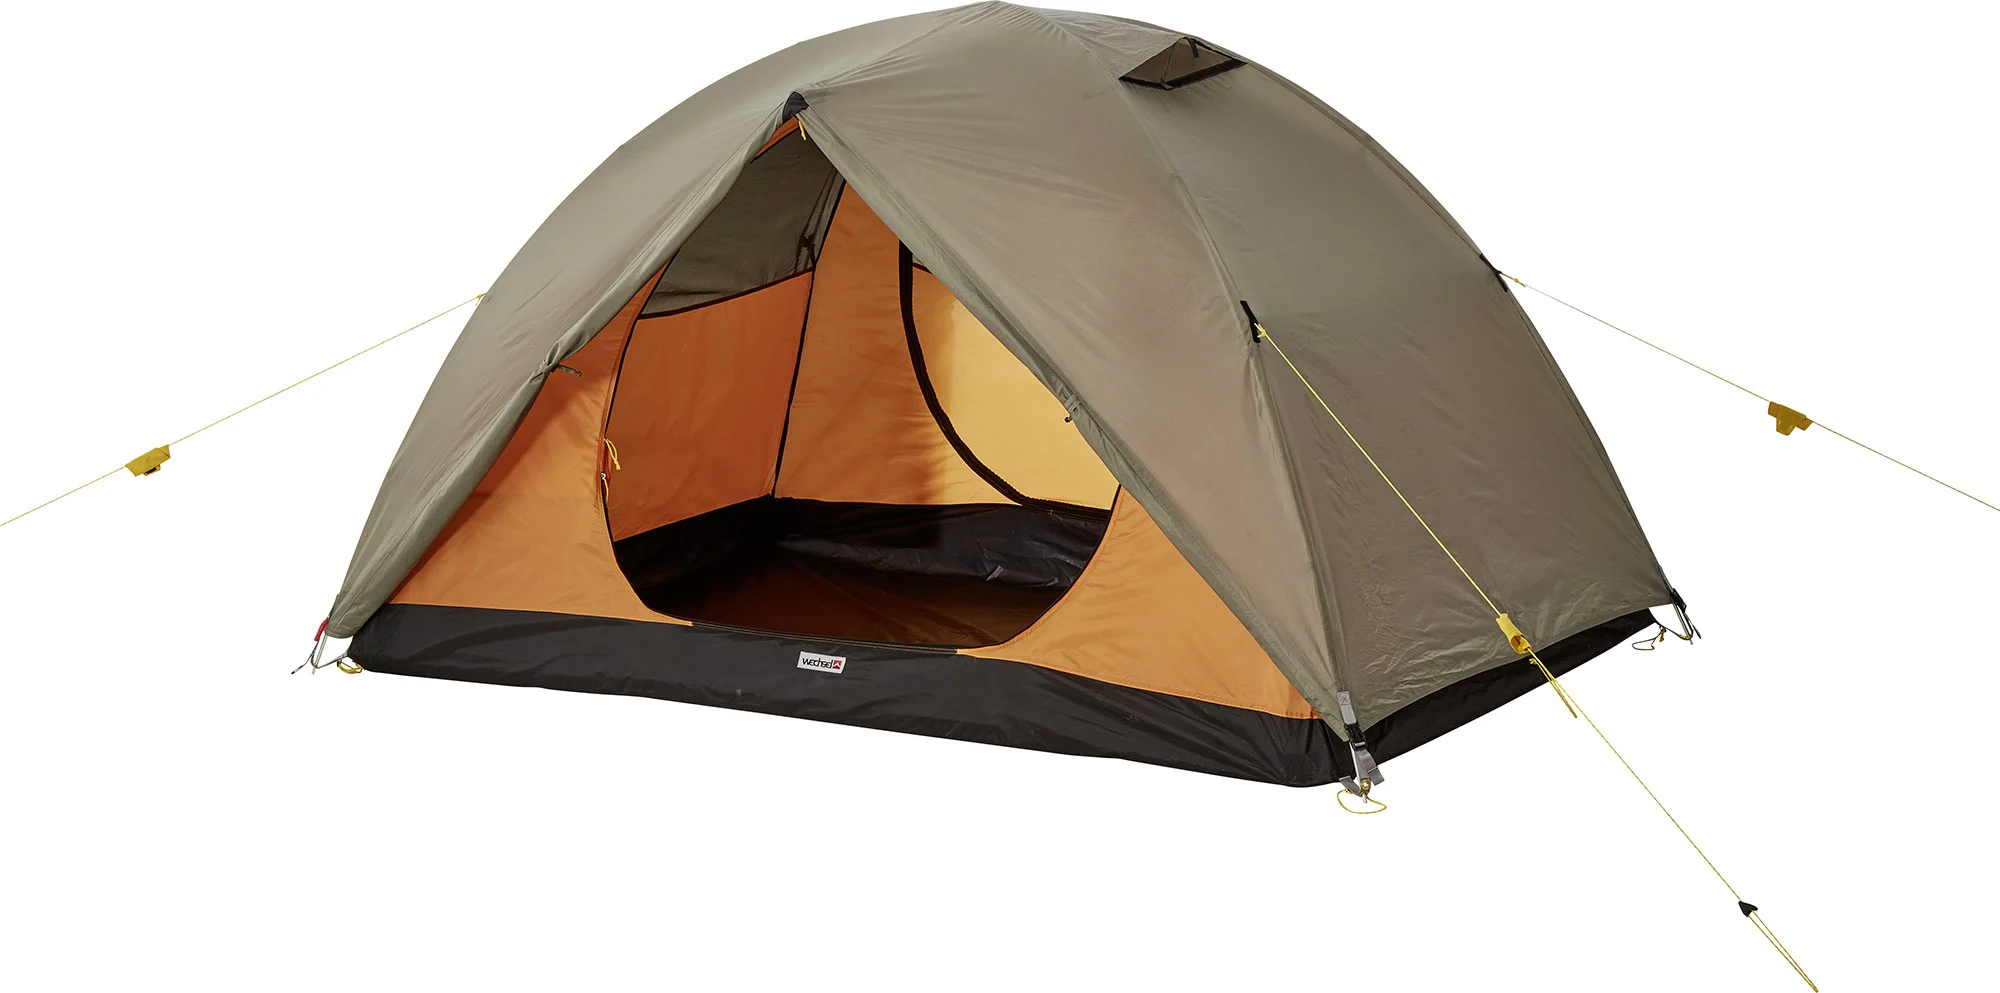 WECHSEL LE DOME TENT